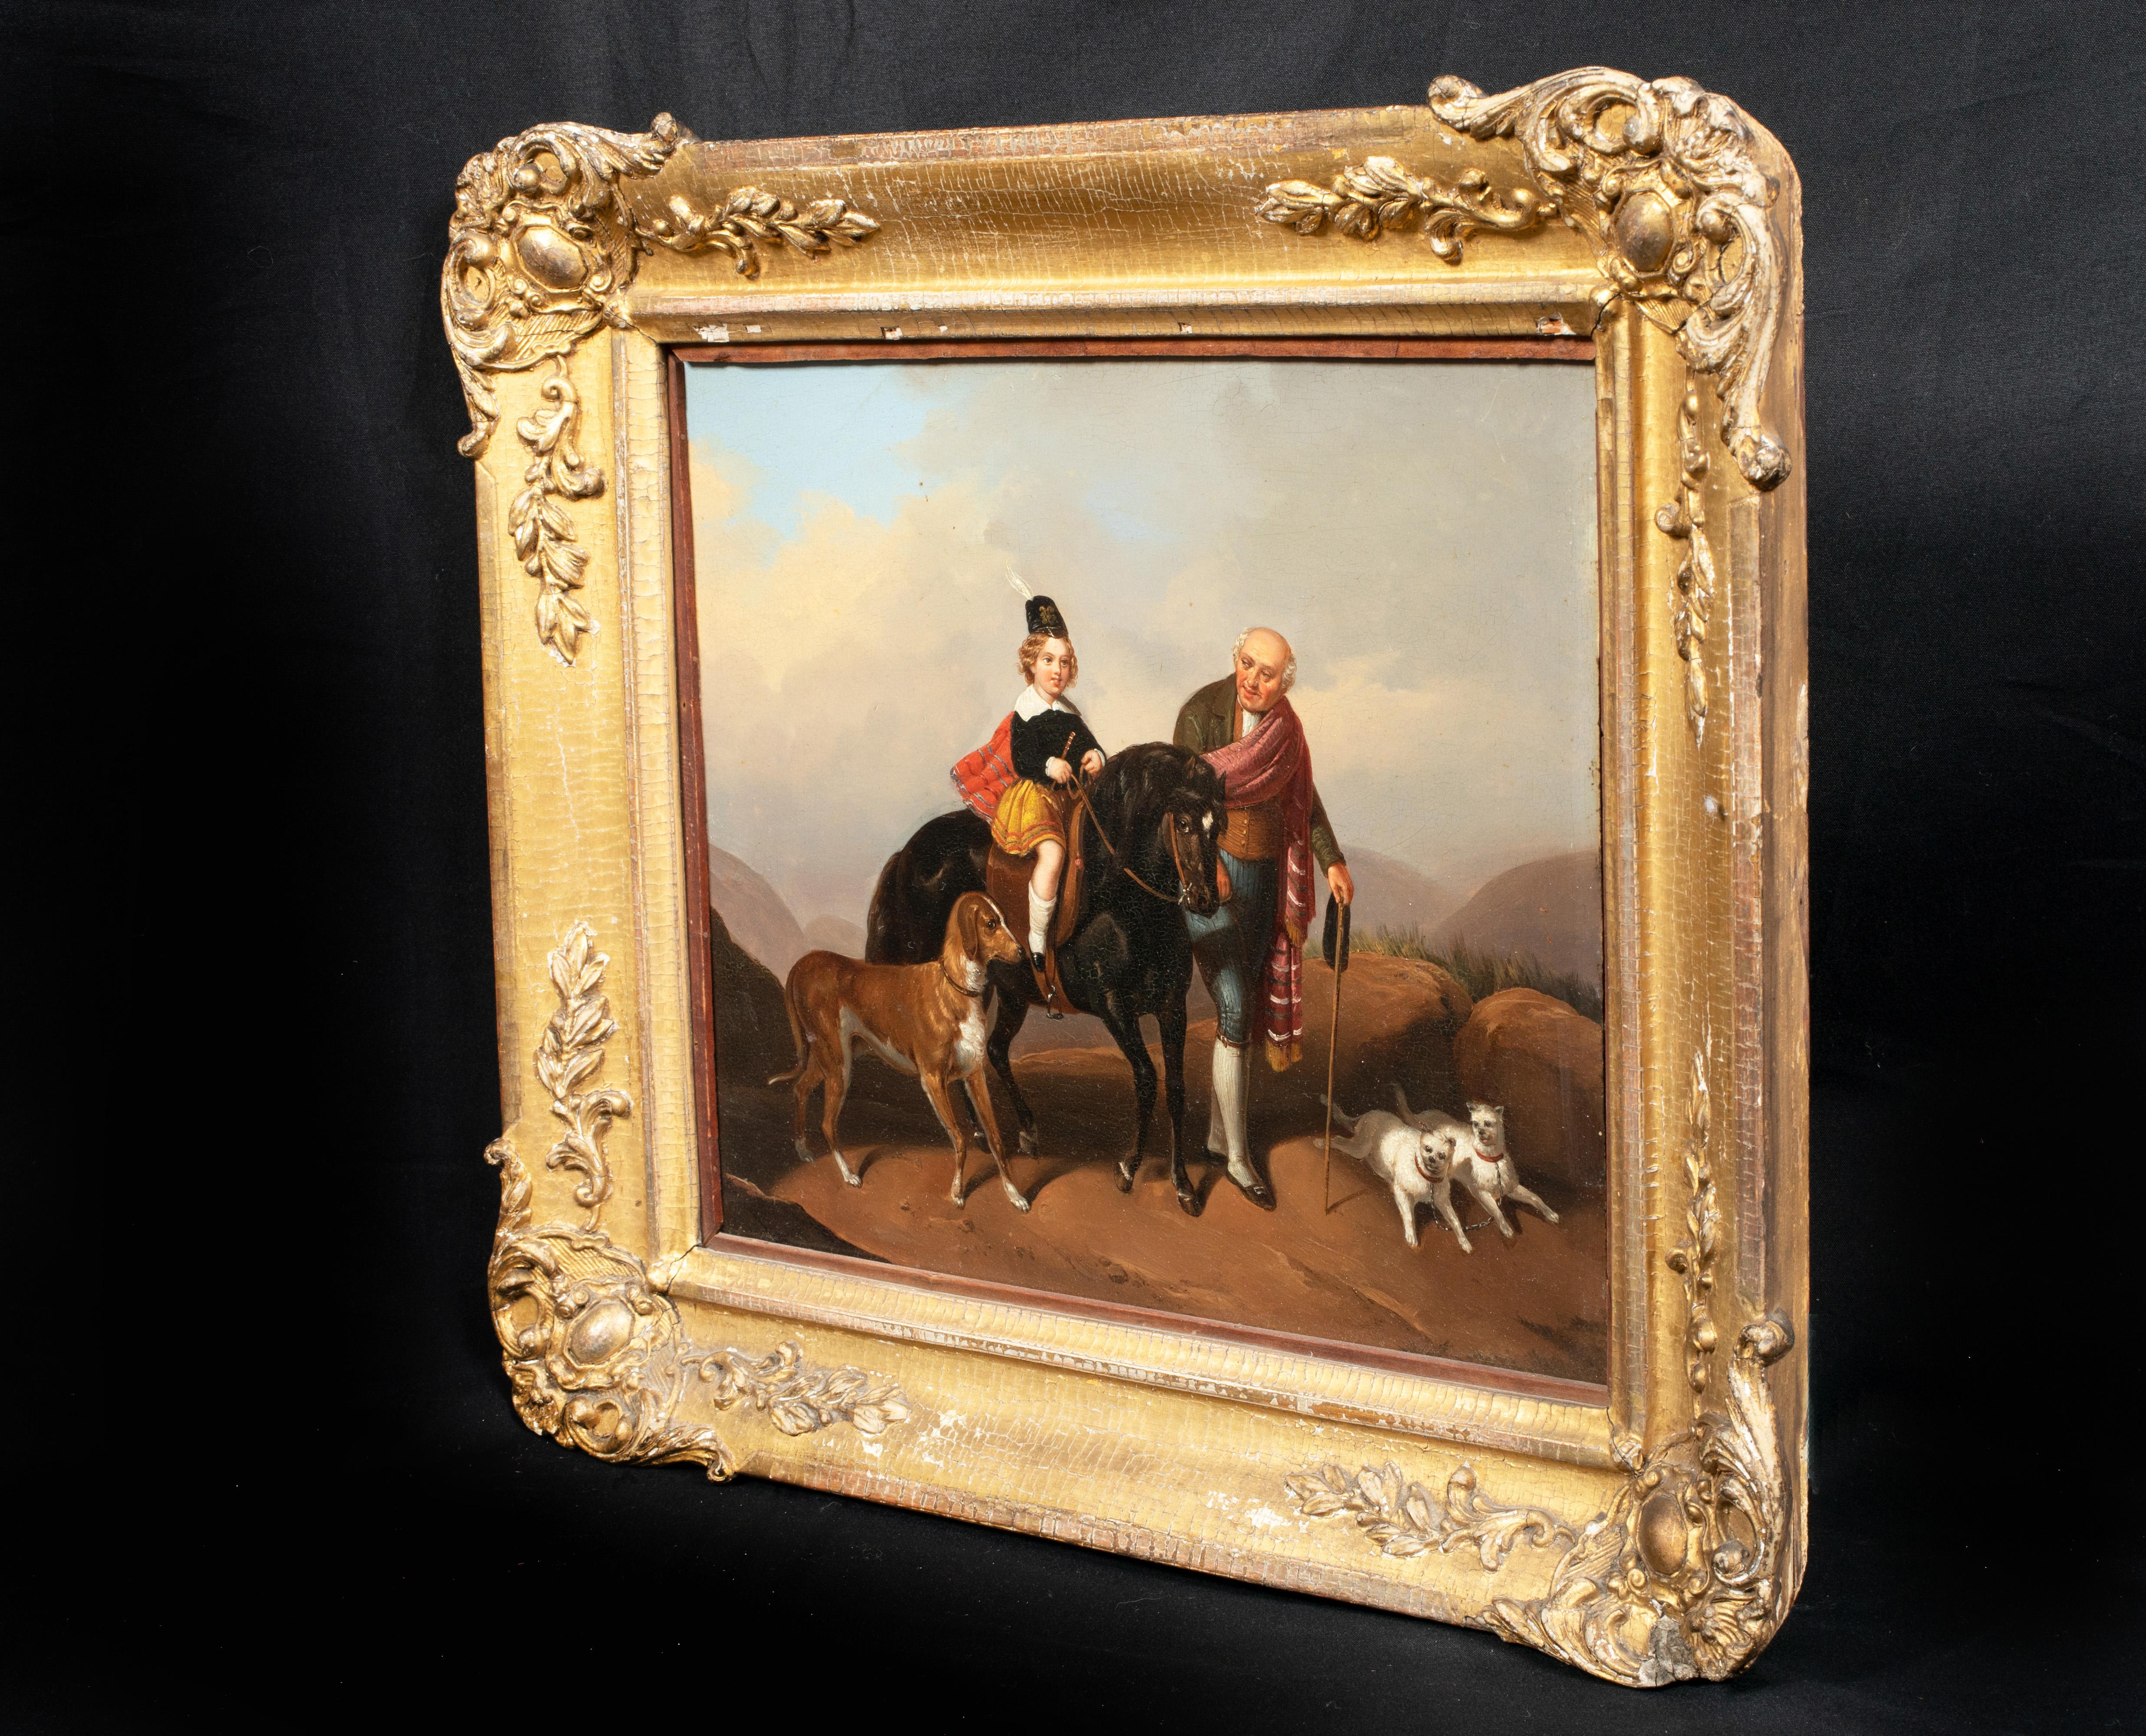 The Young Laird, 19th Century 

attributed to SIR EDWIN HENRY LANDSEER, RA (1802-1873) 

19th century Scottish Highland scene of The Young Laird, oil on metal panel attributed to Edwin Henry Landseer. Excellent quality and condition Highland scene